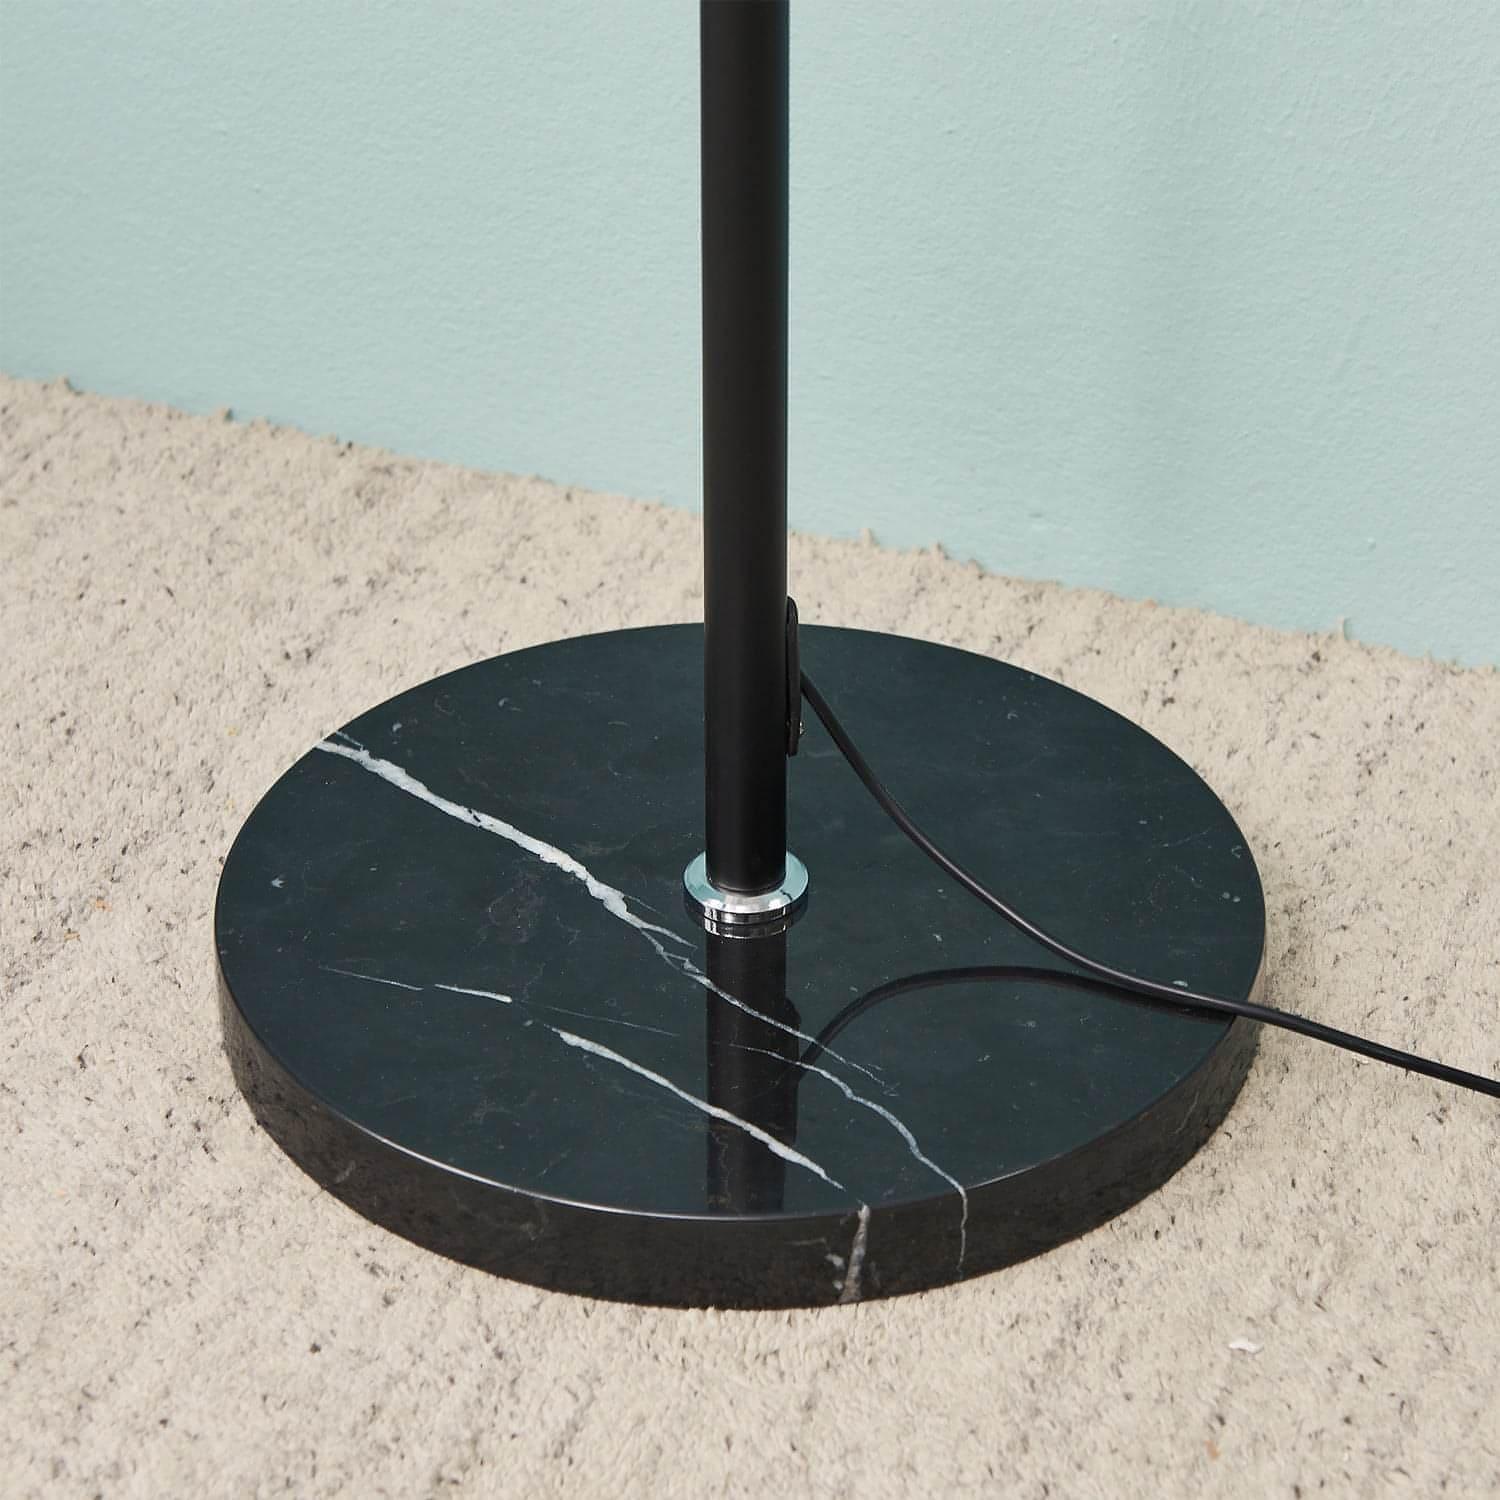 Falon Dimmable Torchiere Floor Lamp With Black Marble Base